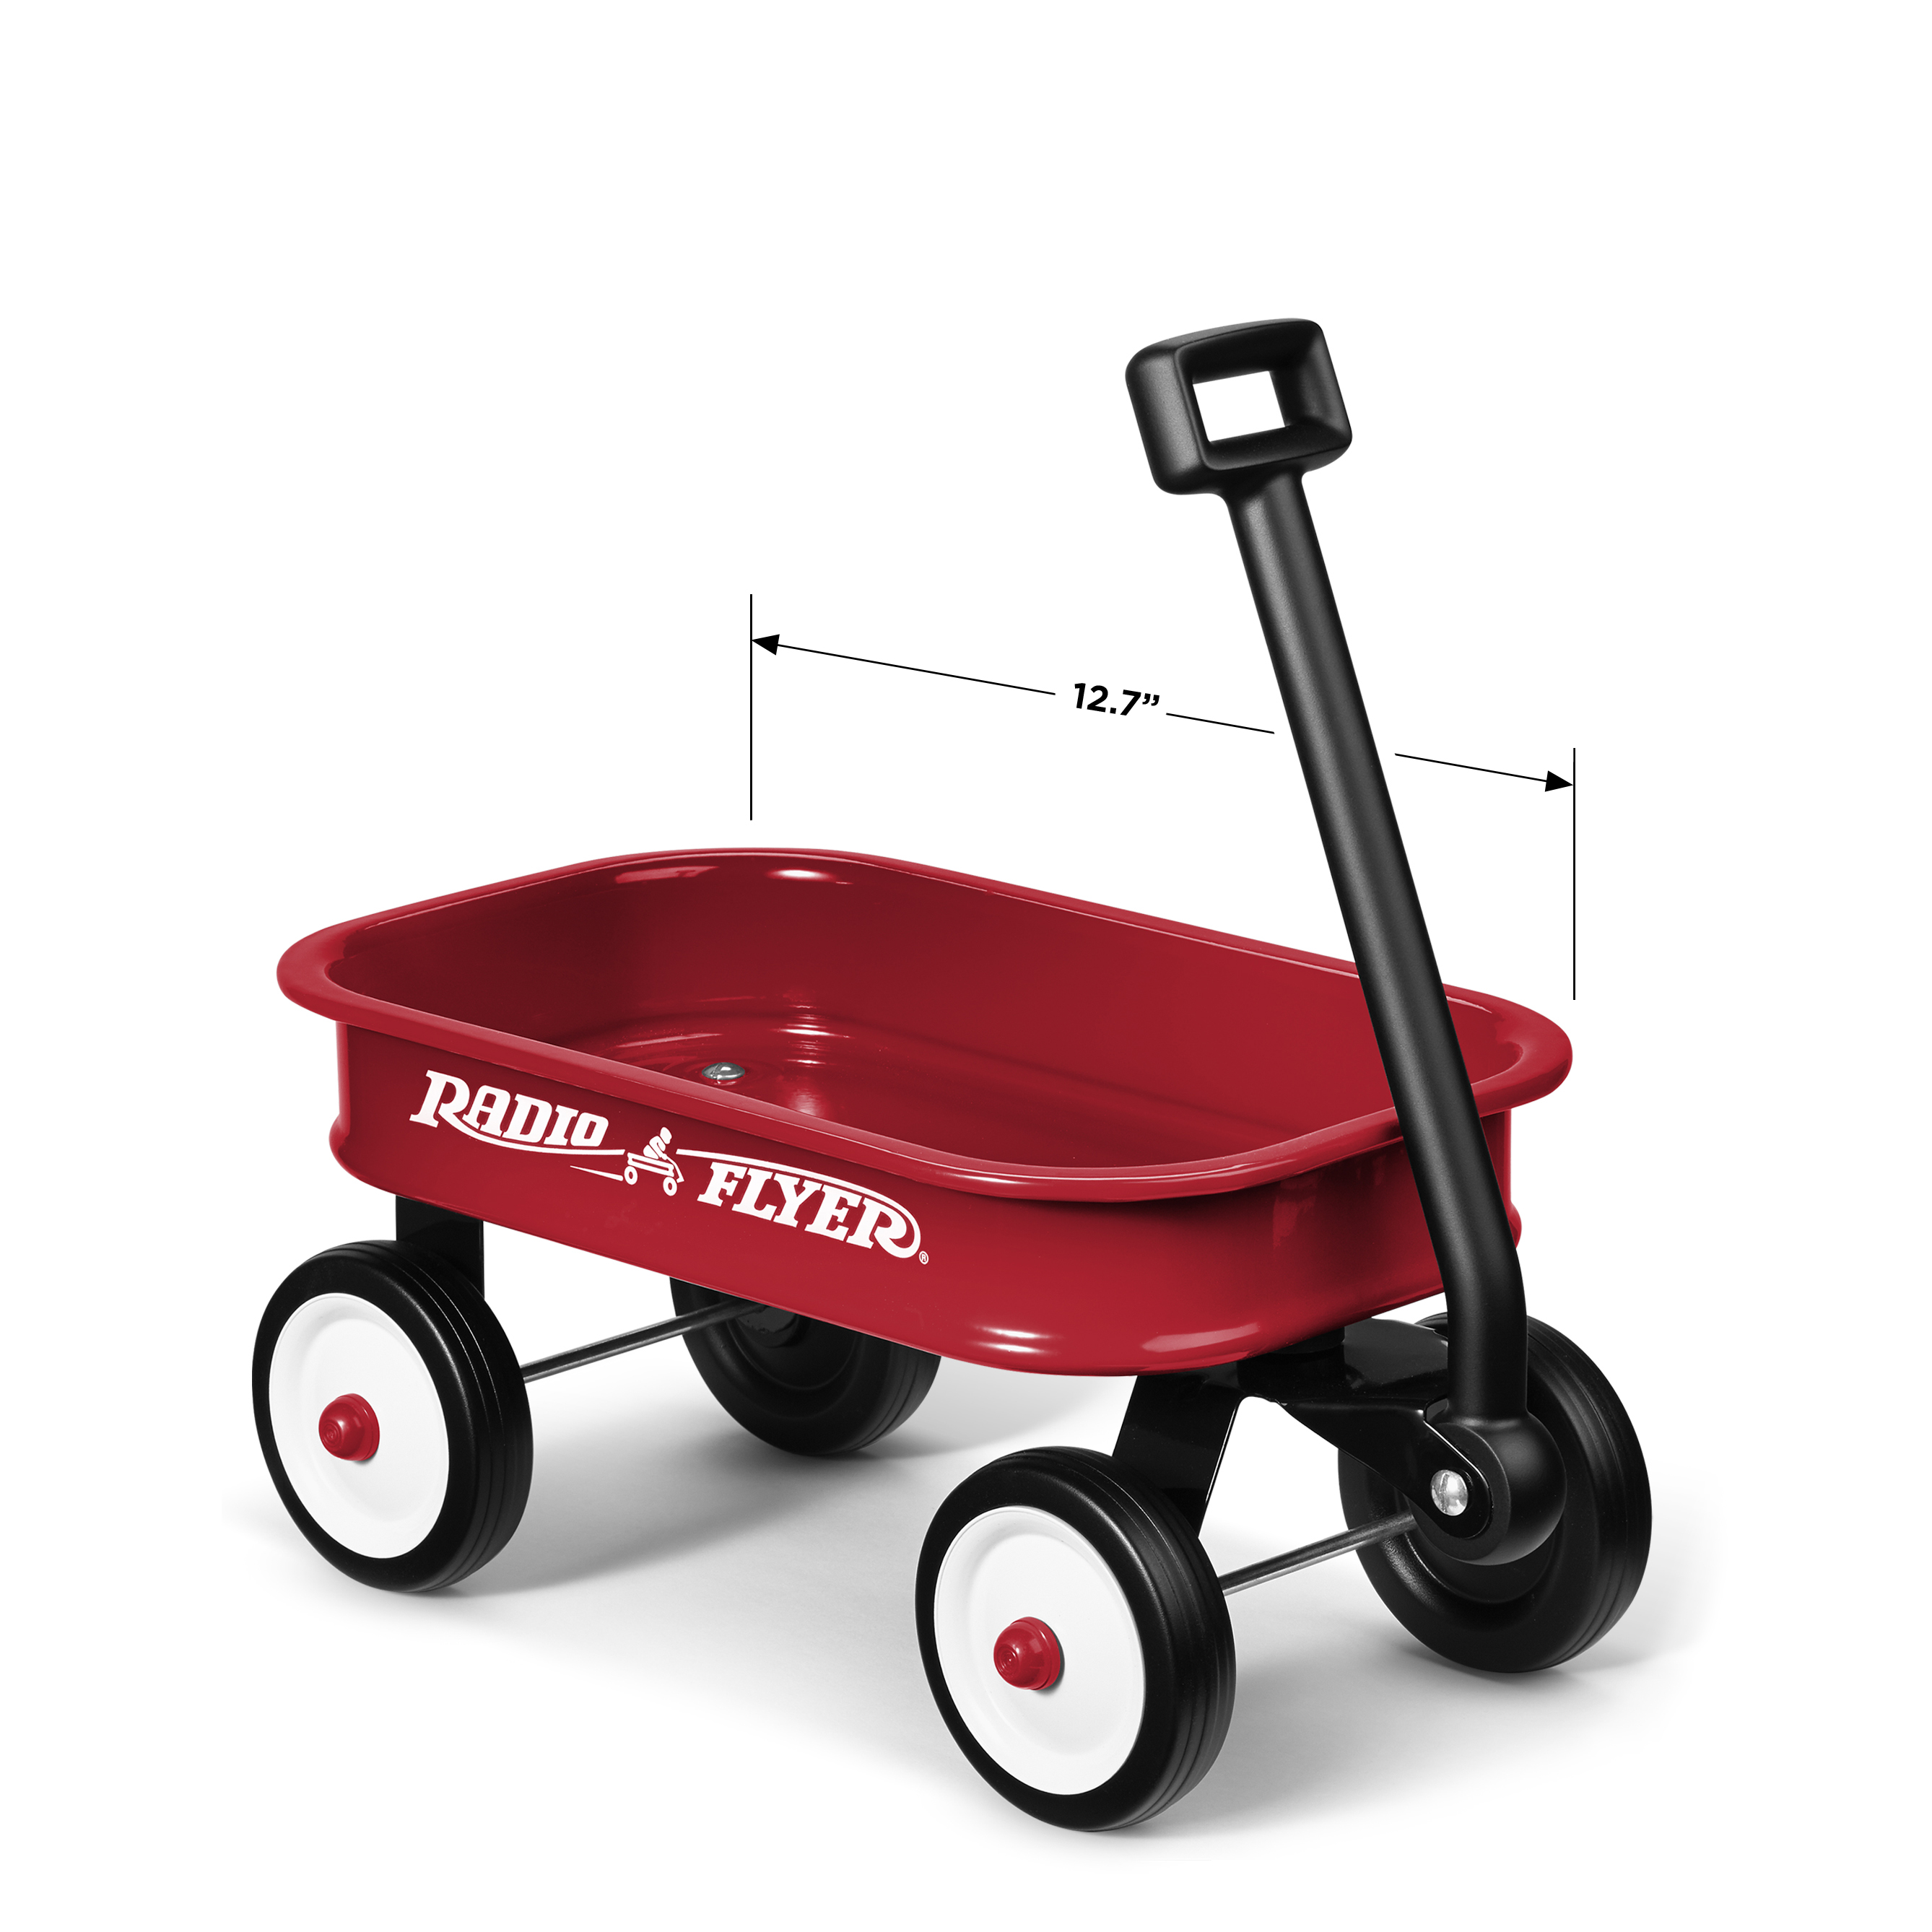 Radio Flyer, Little Red Toy Wagon (12.5" long x 5.7" tall), Miniature Wagon, Red - image 2 of 13